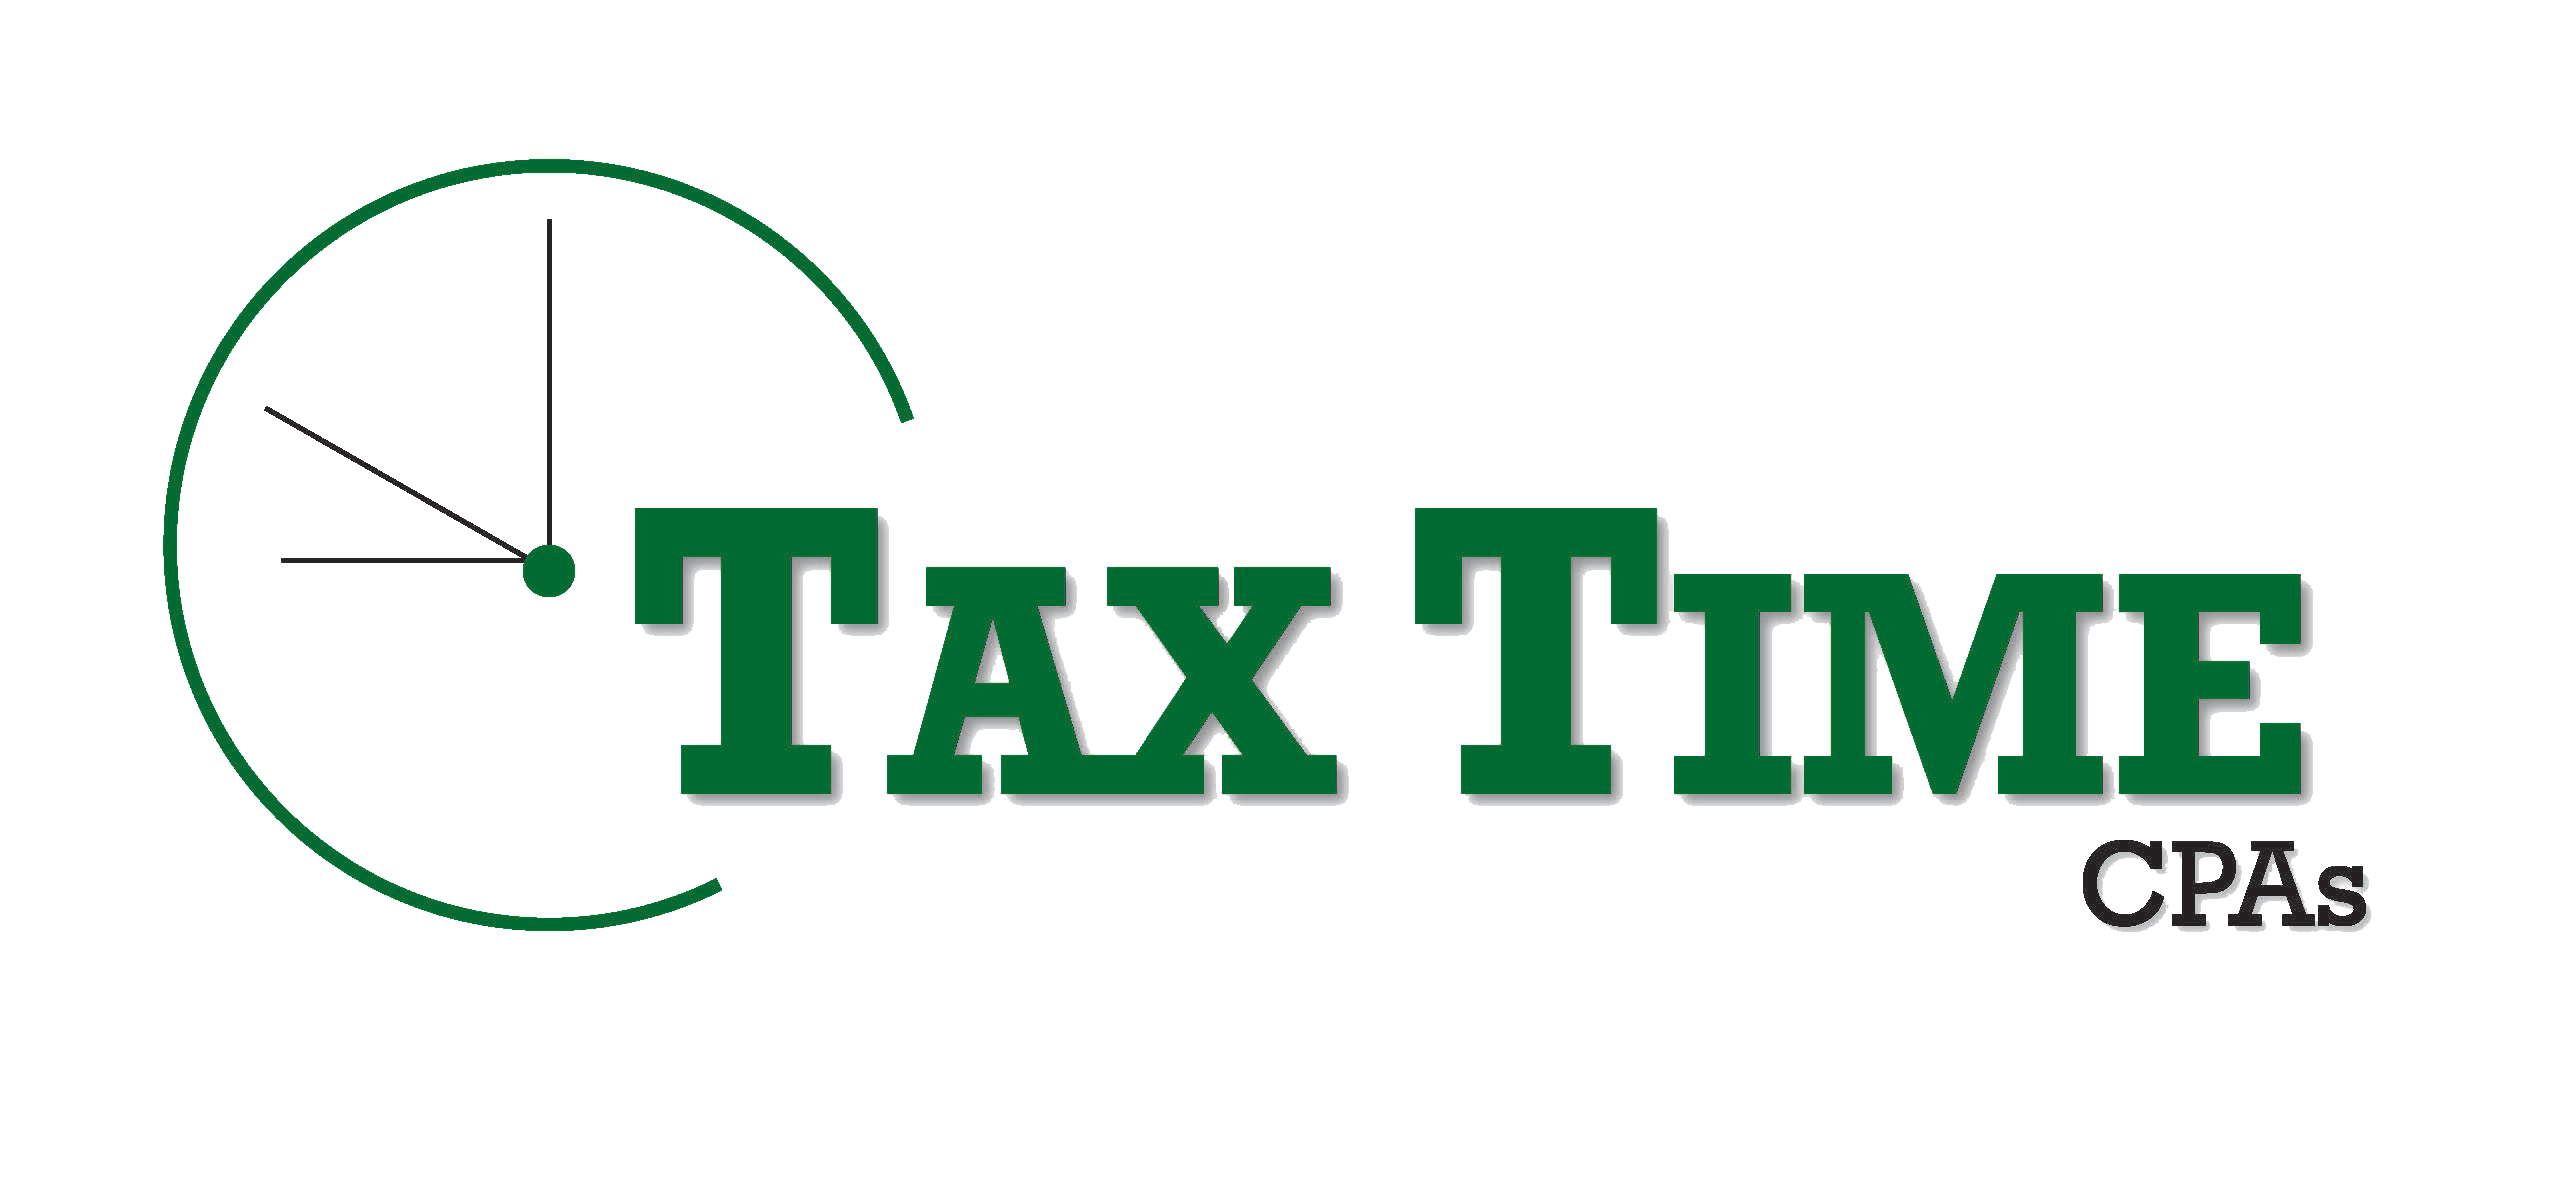 Tax Time CPA logo servicing clients in the Colorado springs area